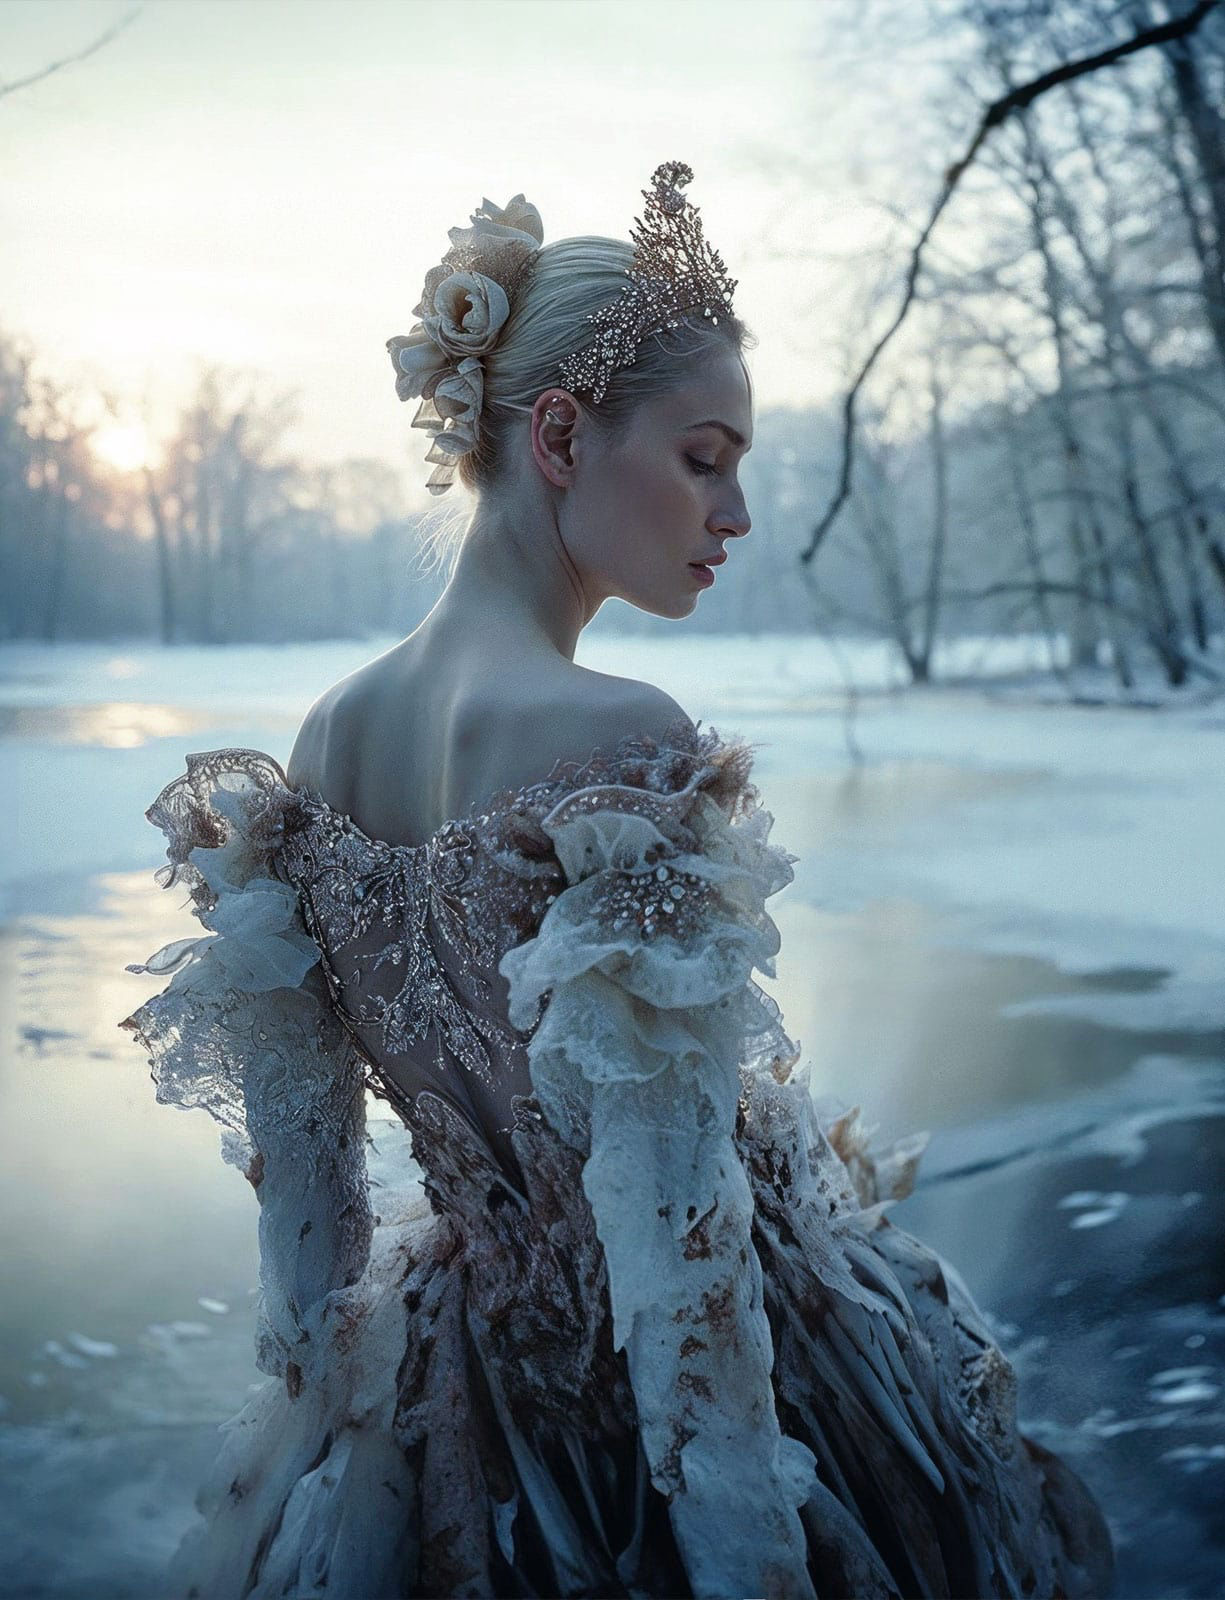 A princess is posing in front of a frozen lake